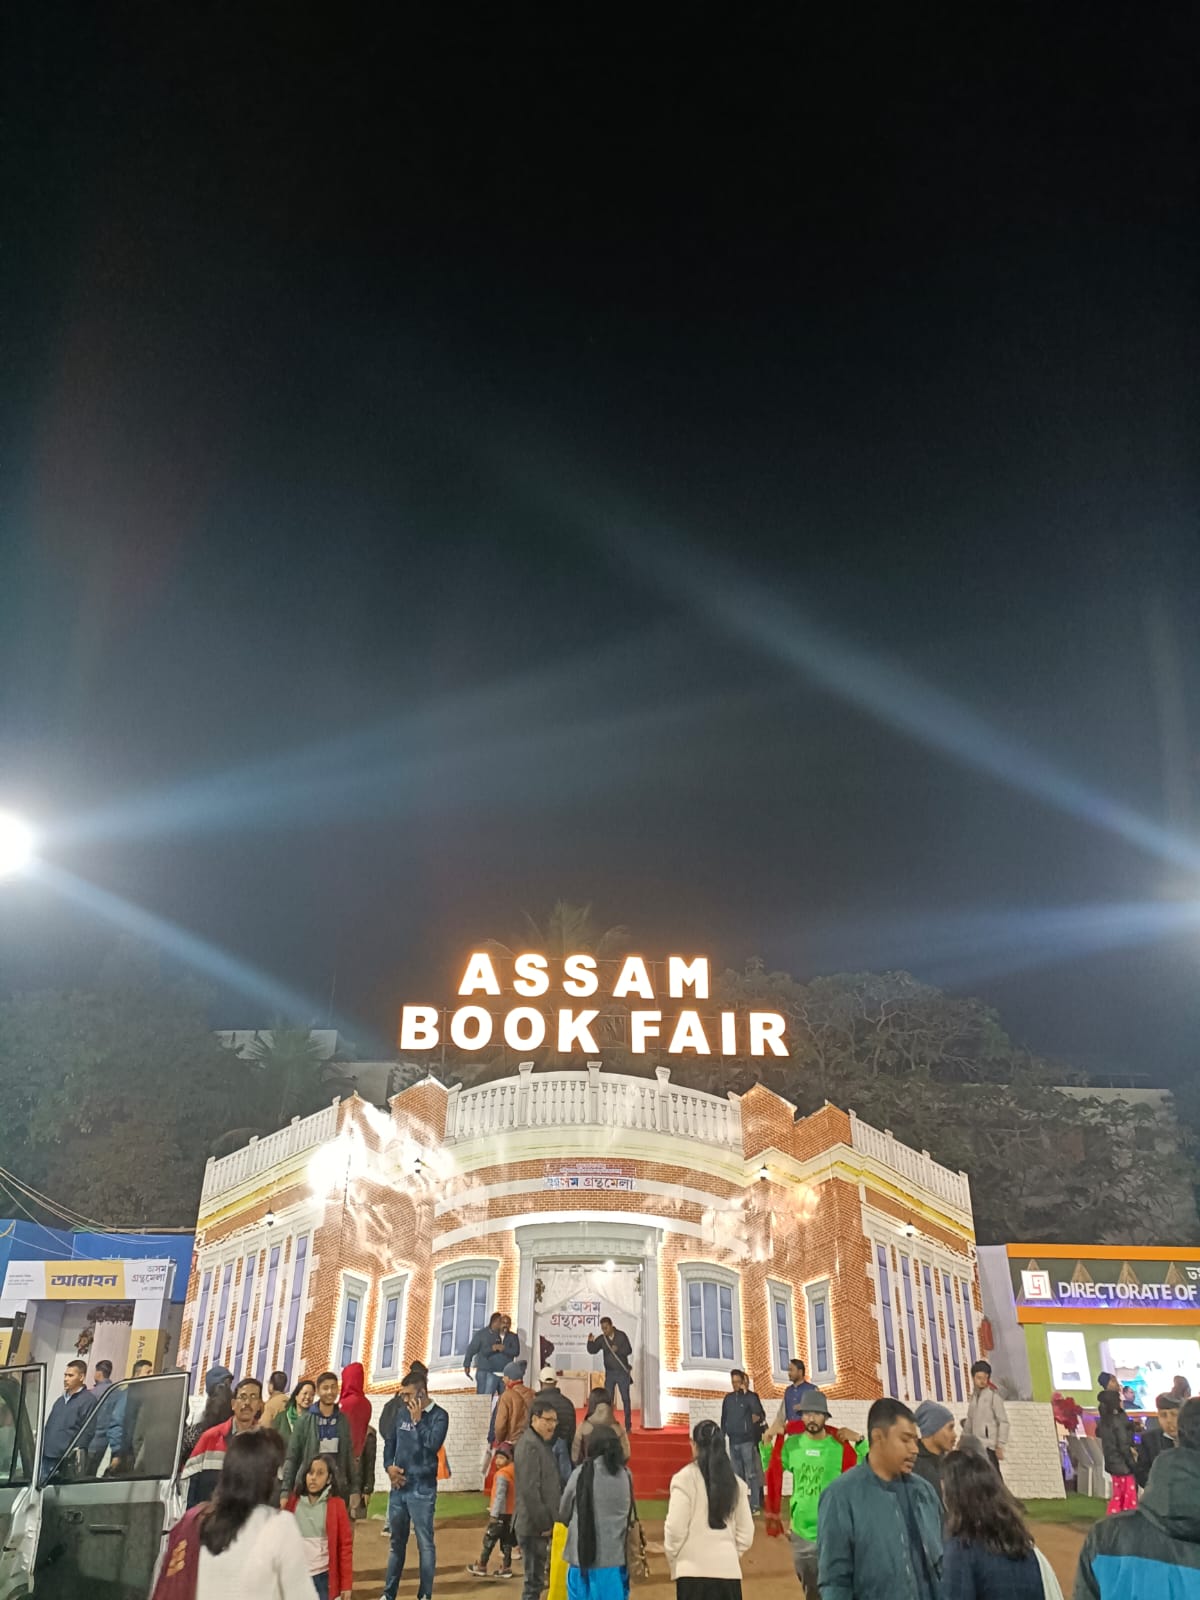 Assam Book Fair concludes with 55.3 mn record book sales in 12 days